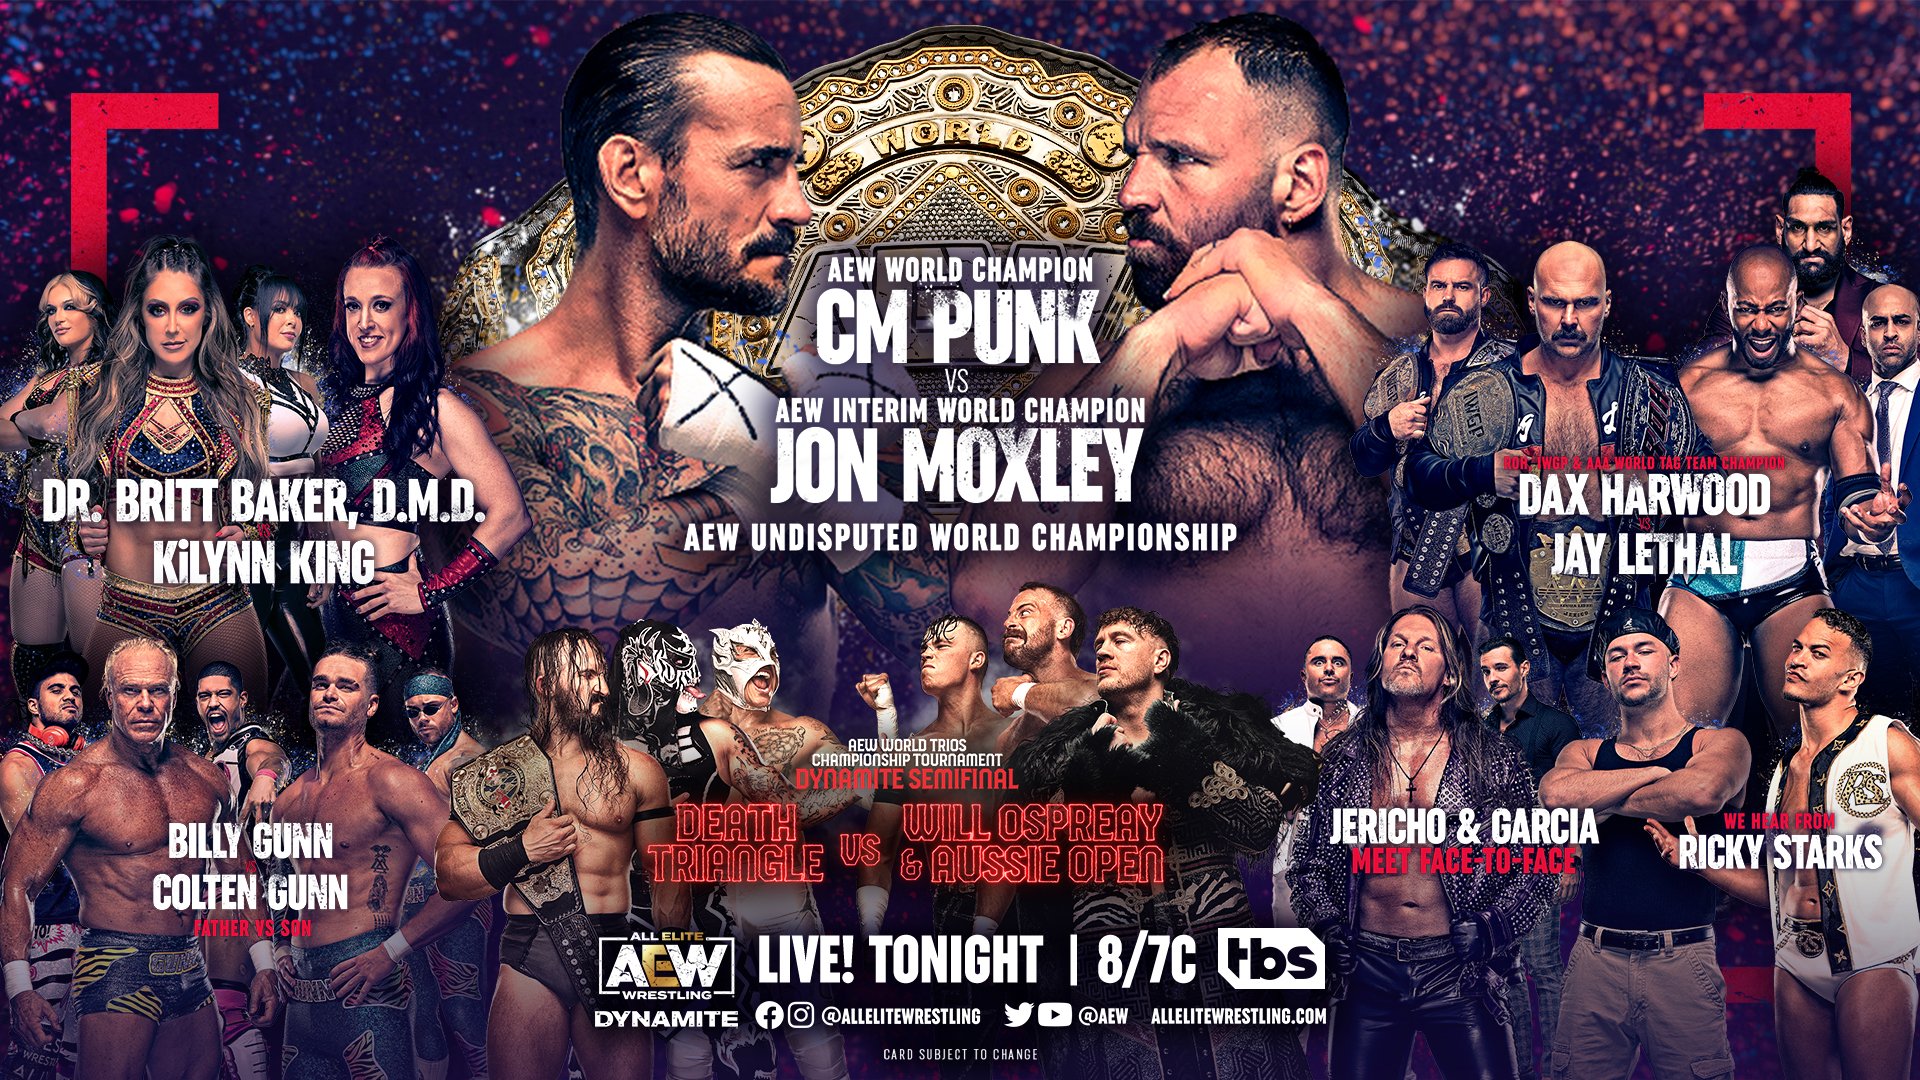 8/24 AEW Dynamite Preview - Undisputed World Championship Match